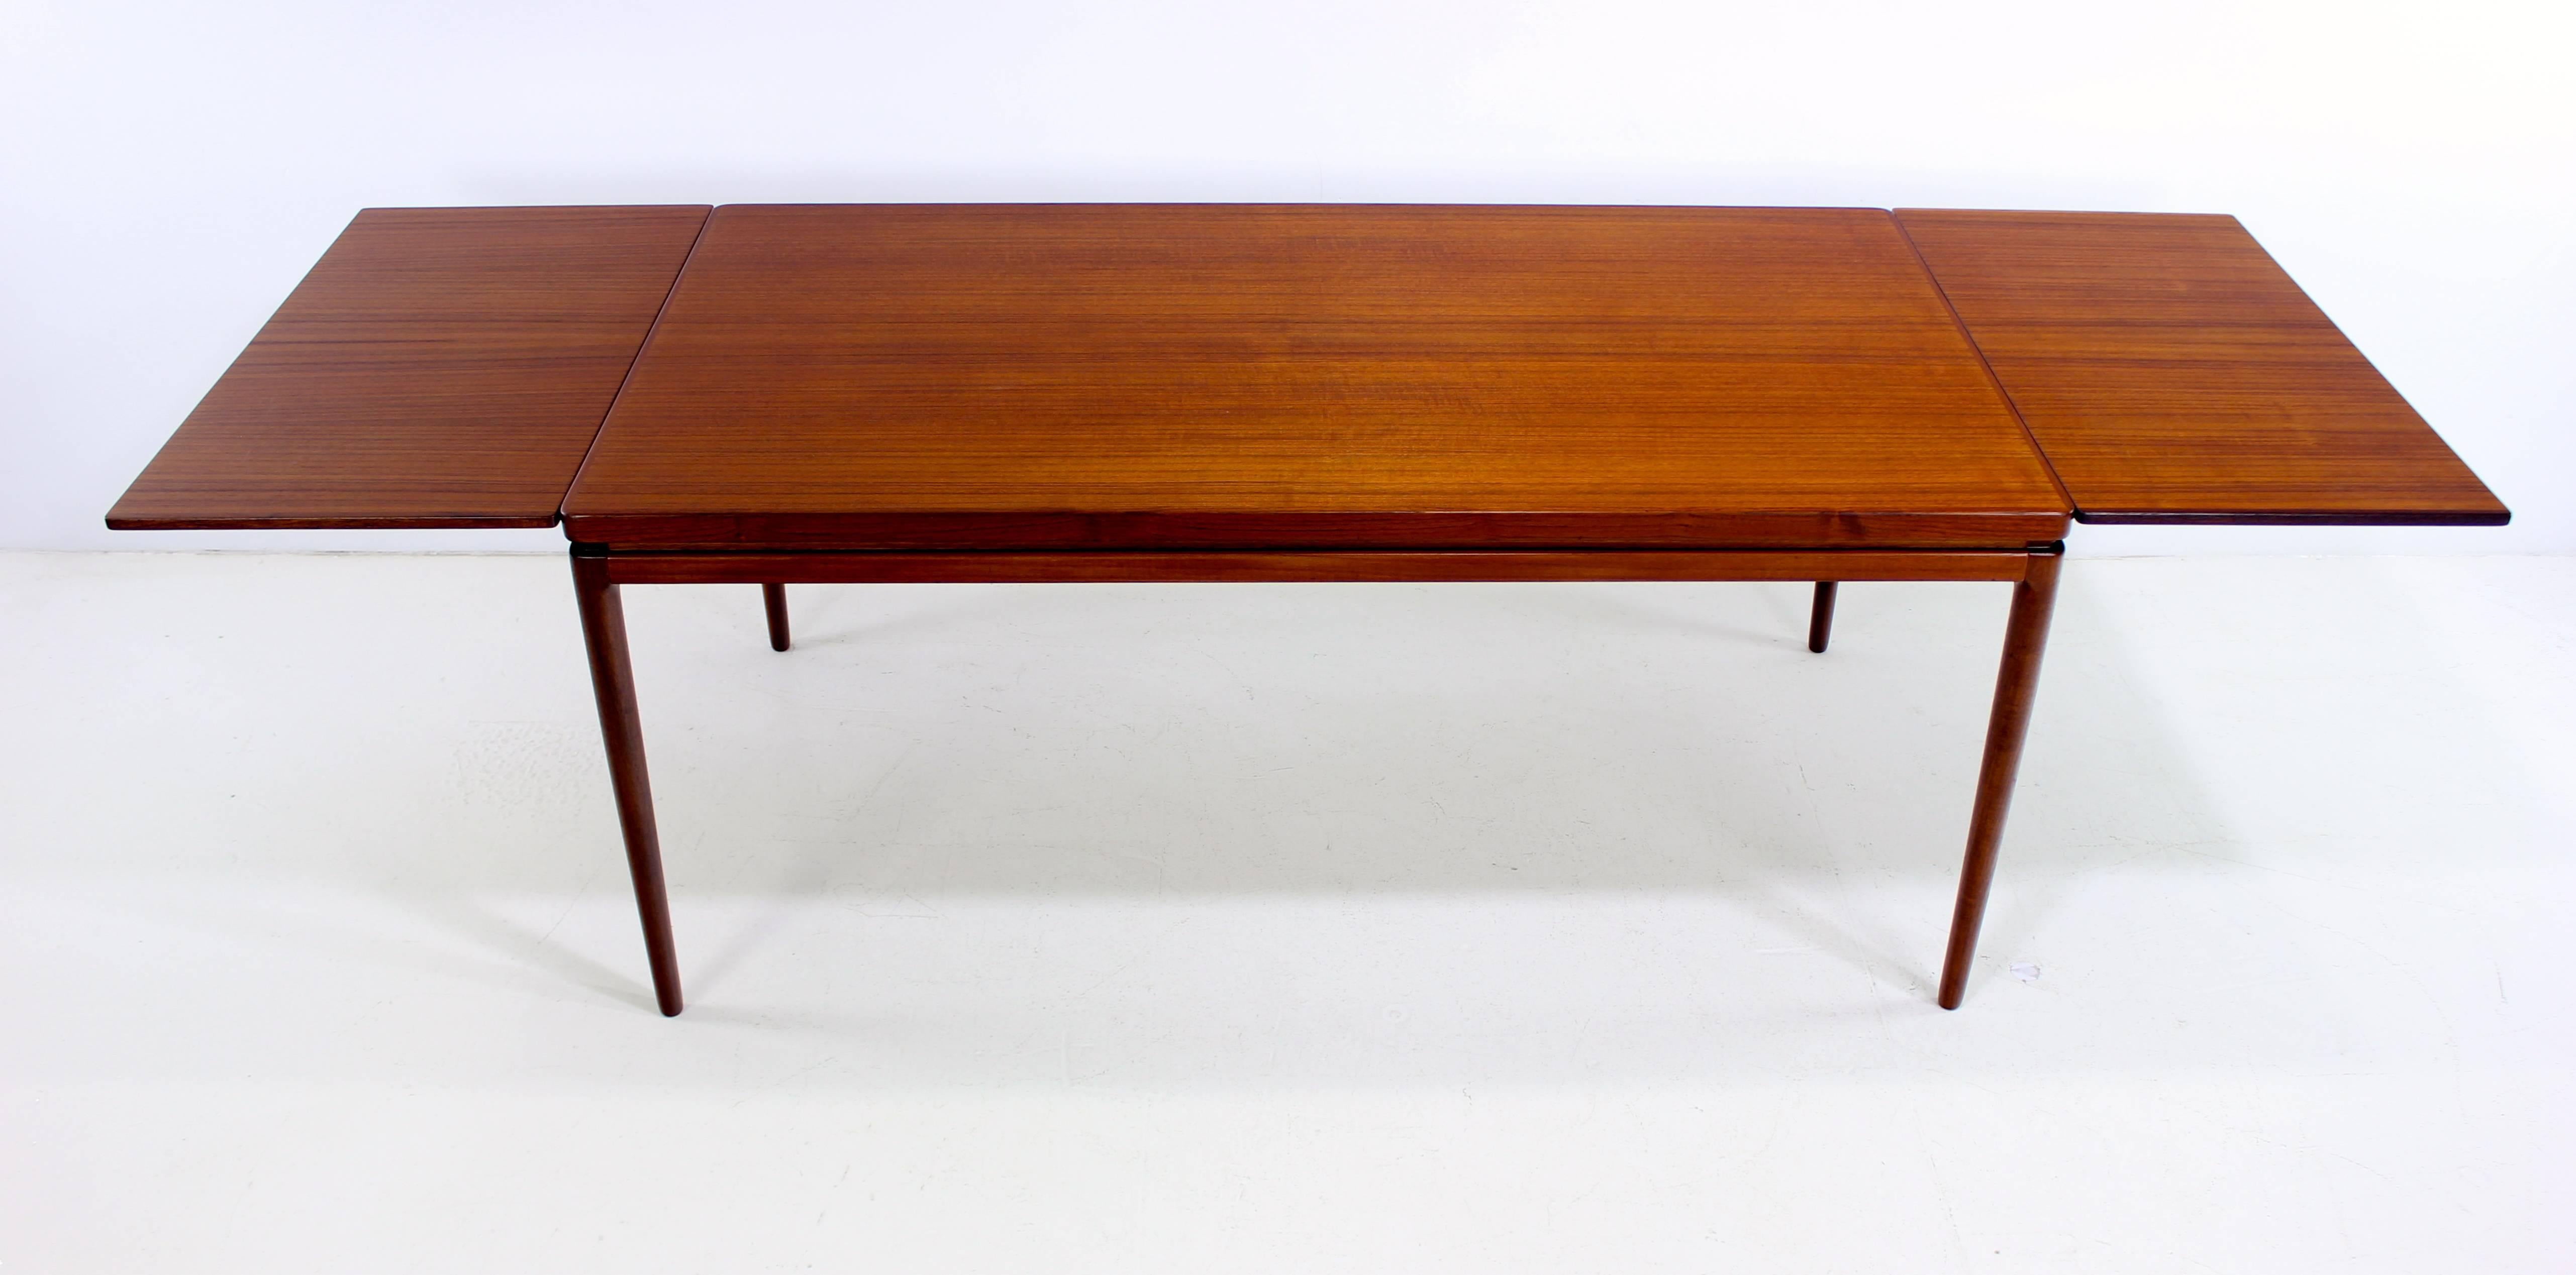 Danish modern dining table designed by Johannes Andersen.
Draw leaves pull-out from each end providing a full extension of 104.5